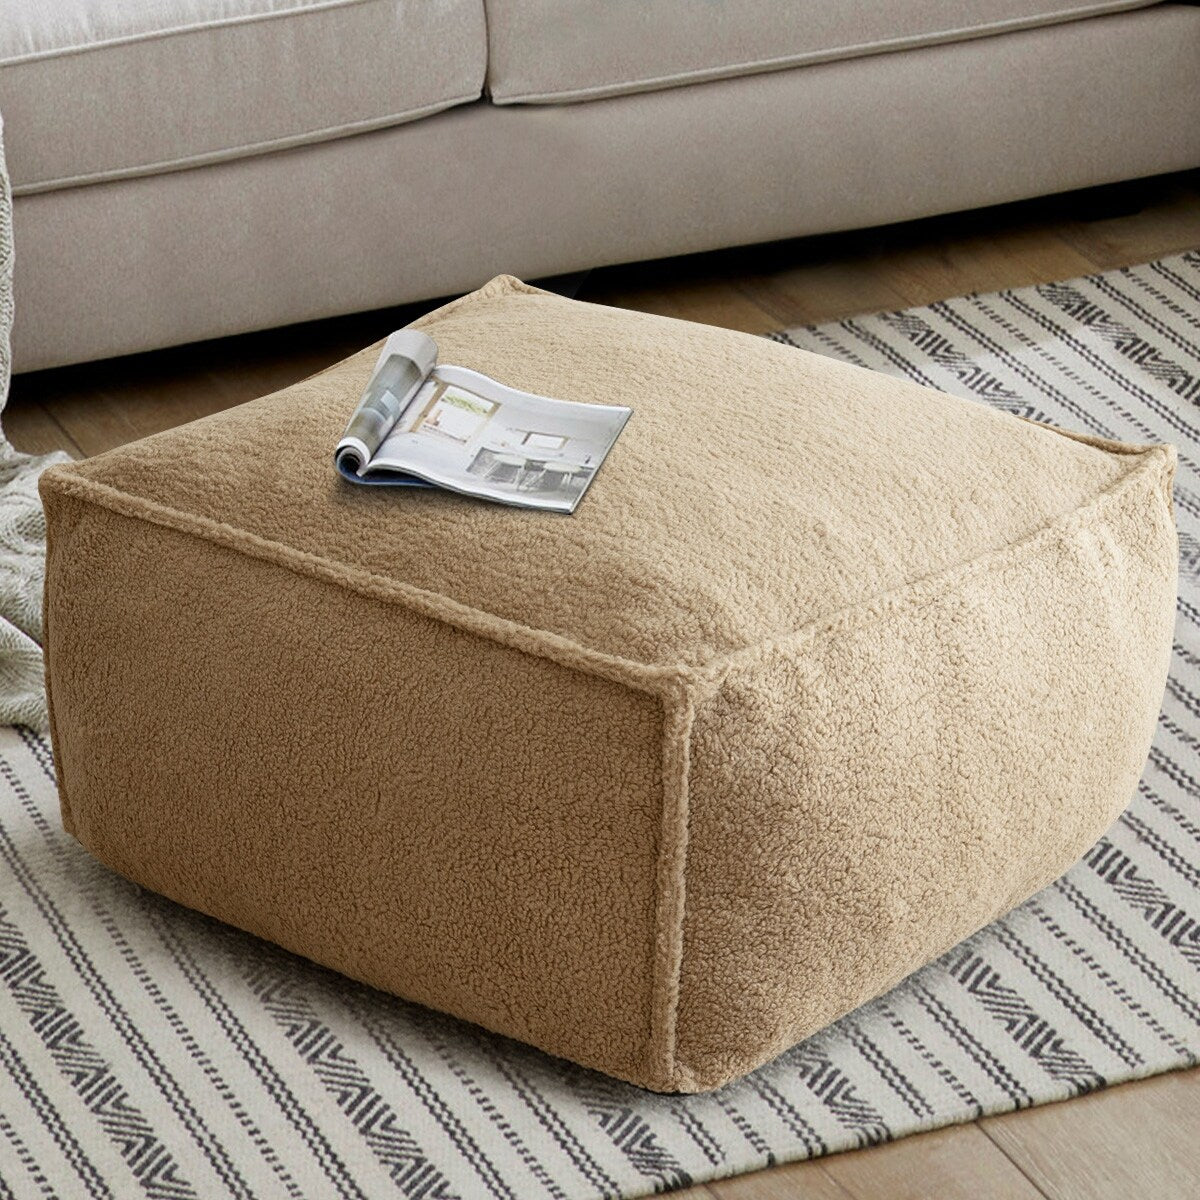 Lazy Sofateddy Faux Fabric Couch Living Room Sofa Bean Bag Chair with Memory Foam